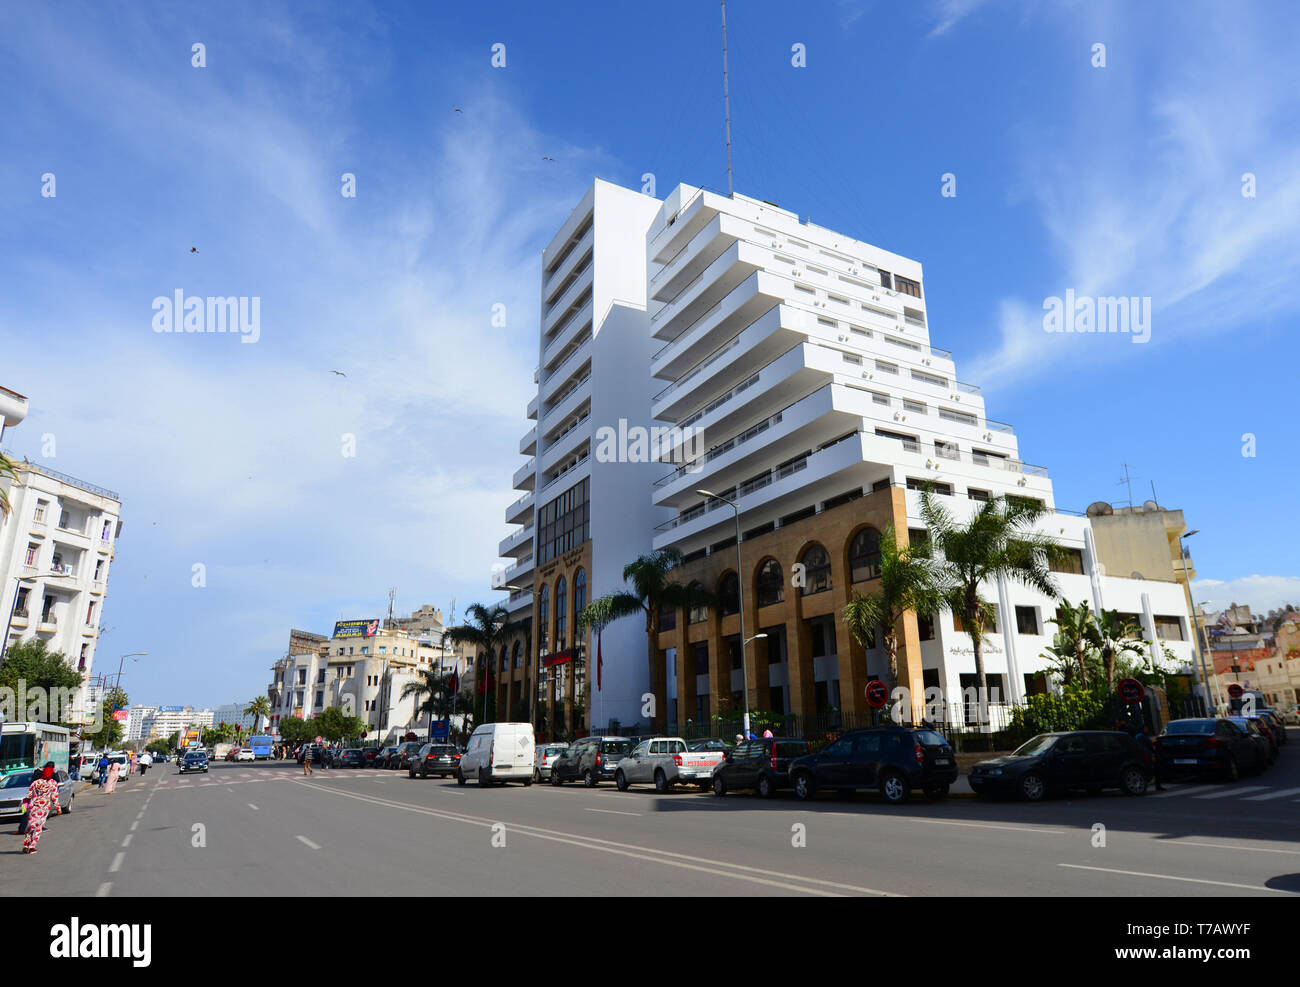 New modern buildings painted in the Iconic white color of Casablanca. Stock Photo